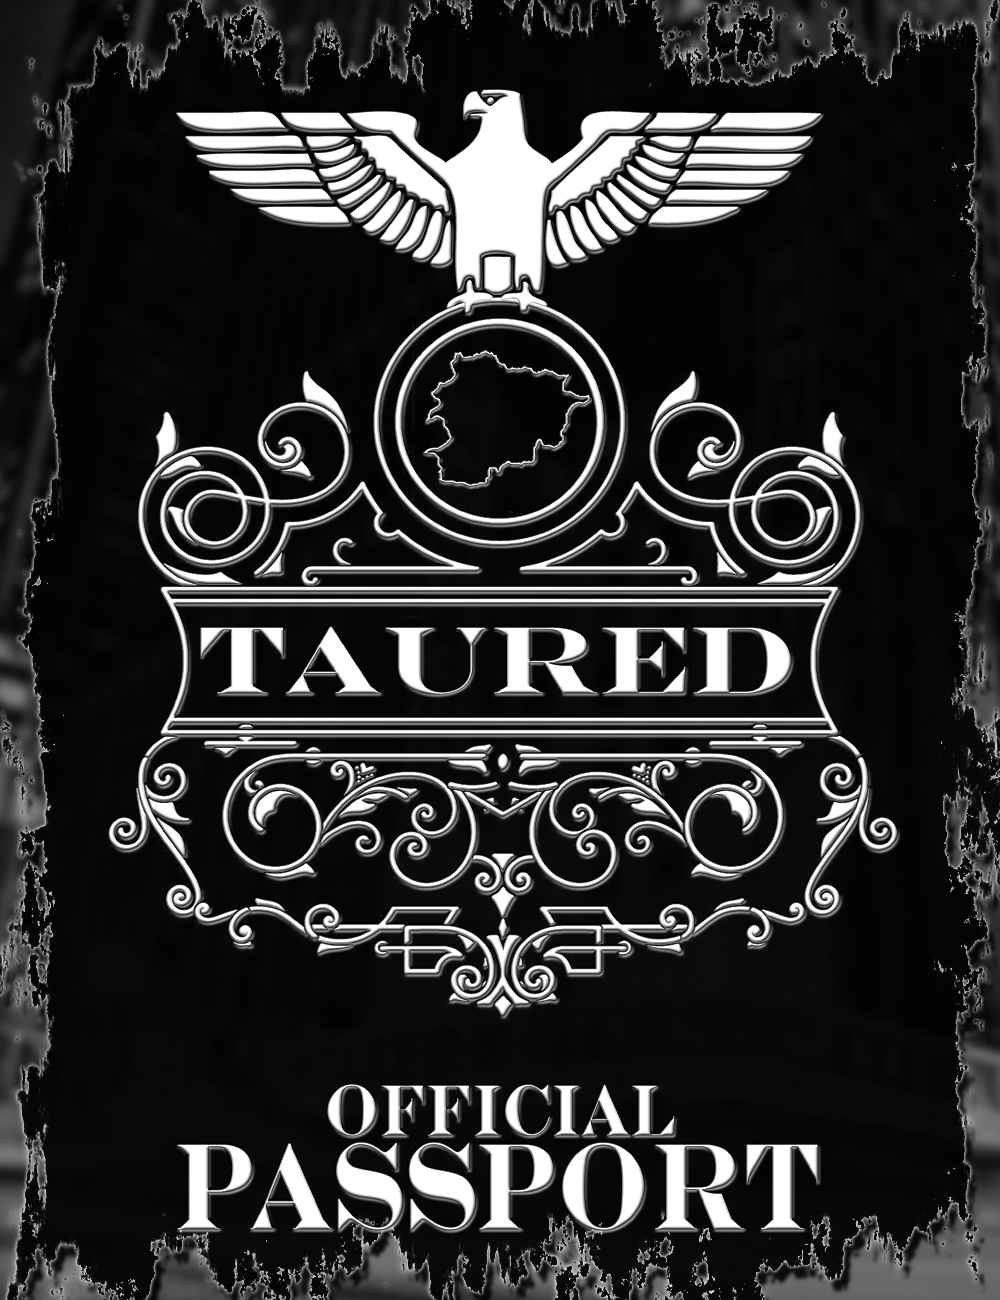 The Man From Taured Tee Design